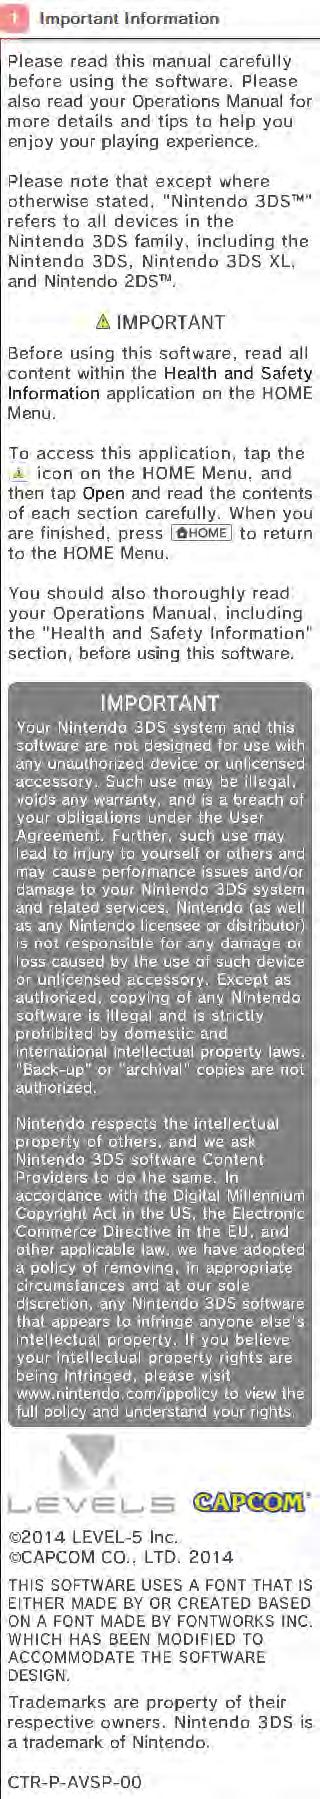 Important Information Please read this manual carefully before using the software. Please also read your Operations Manual for more details and tips to help you enjoy your playing experience.